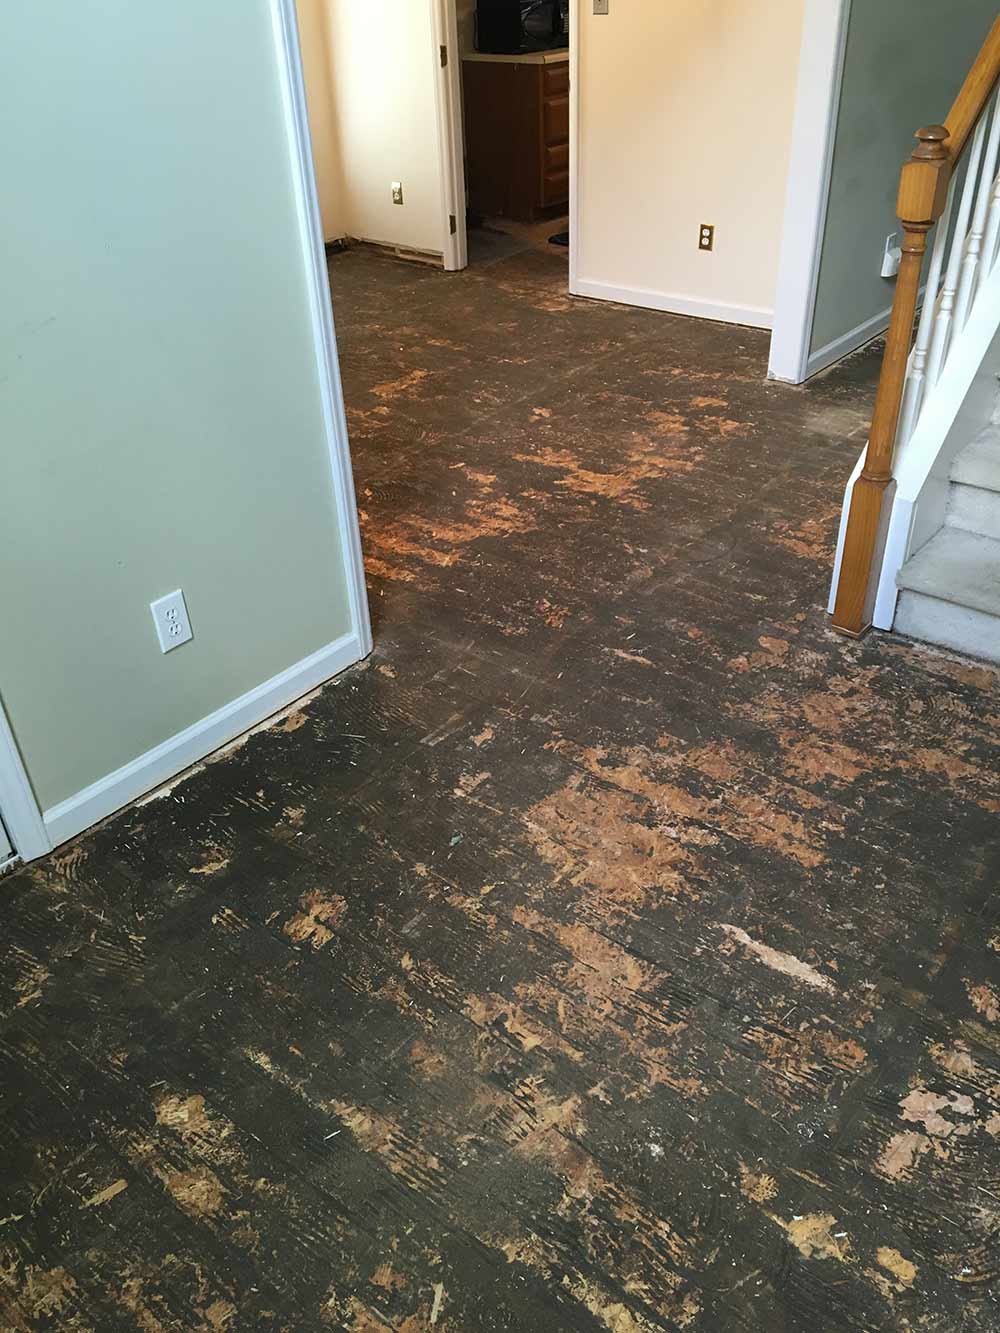 Leaking Pipe Water Damage Restoration in North Raleigh, NC 2